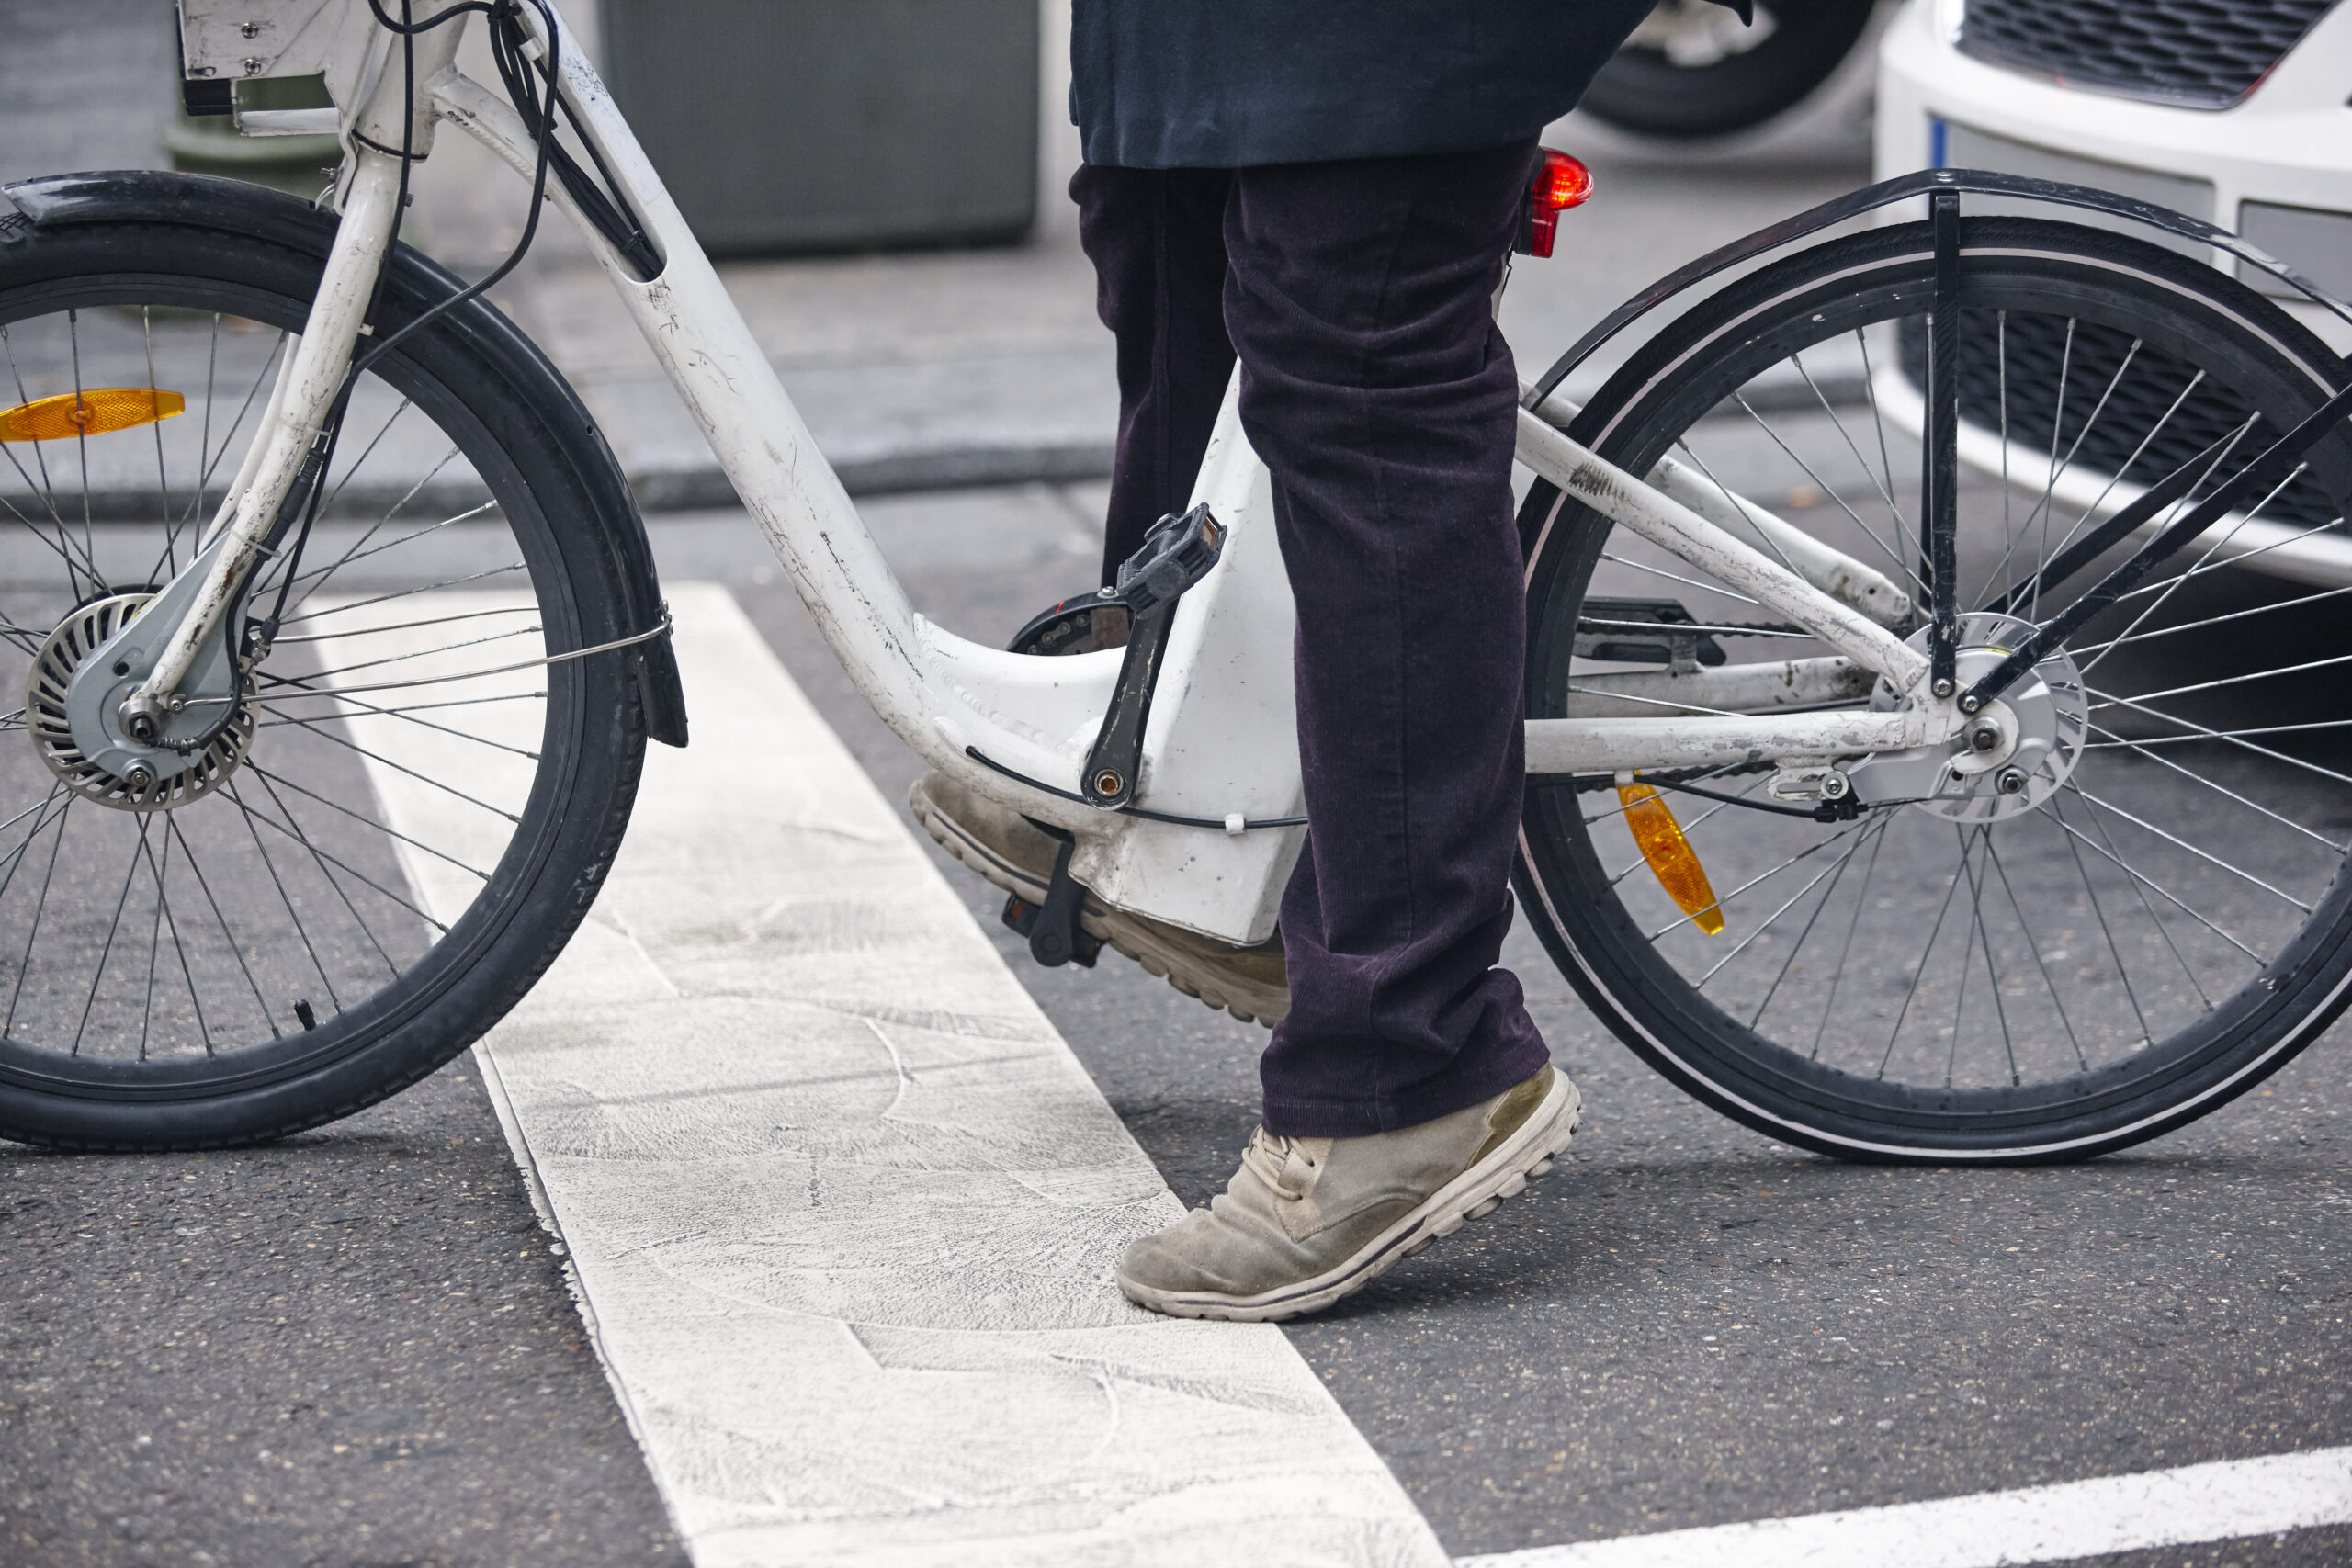 What extra costs can you expect when you buy an e-bike?